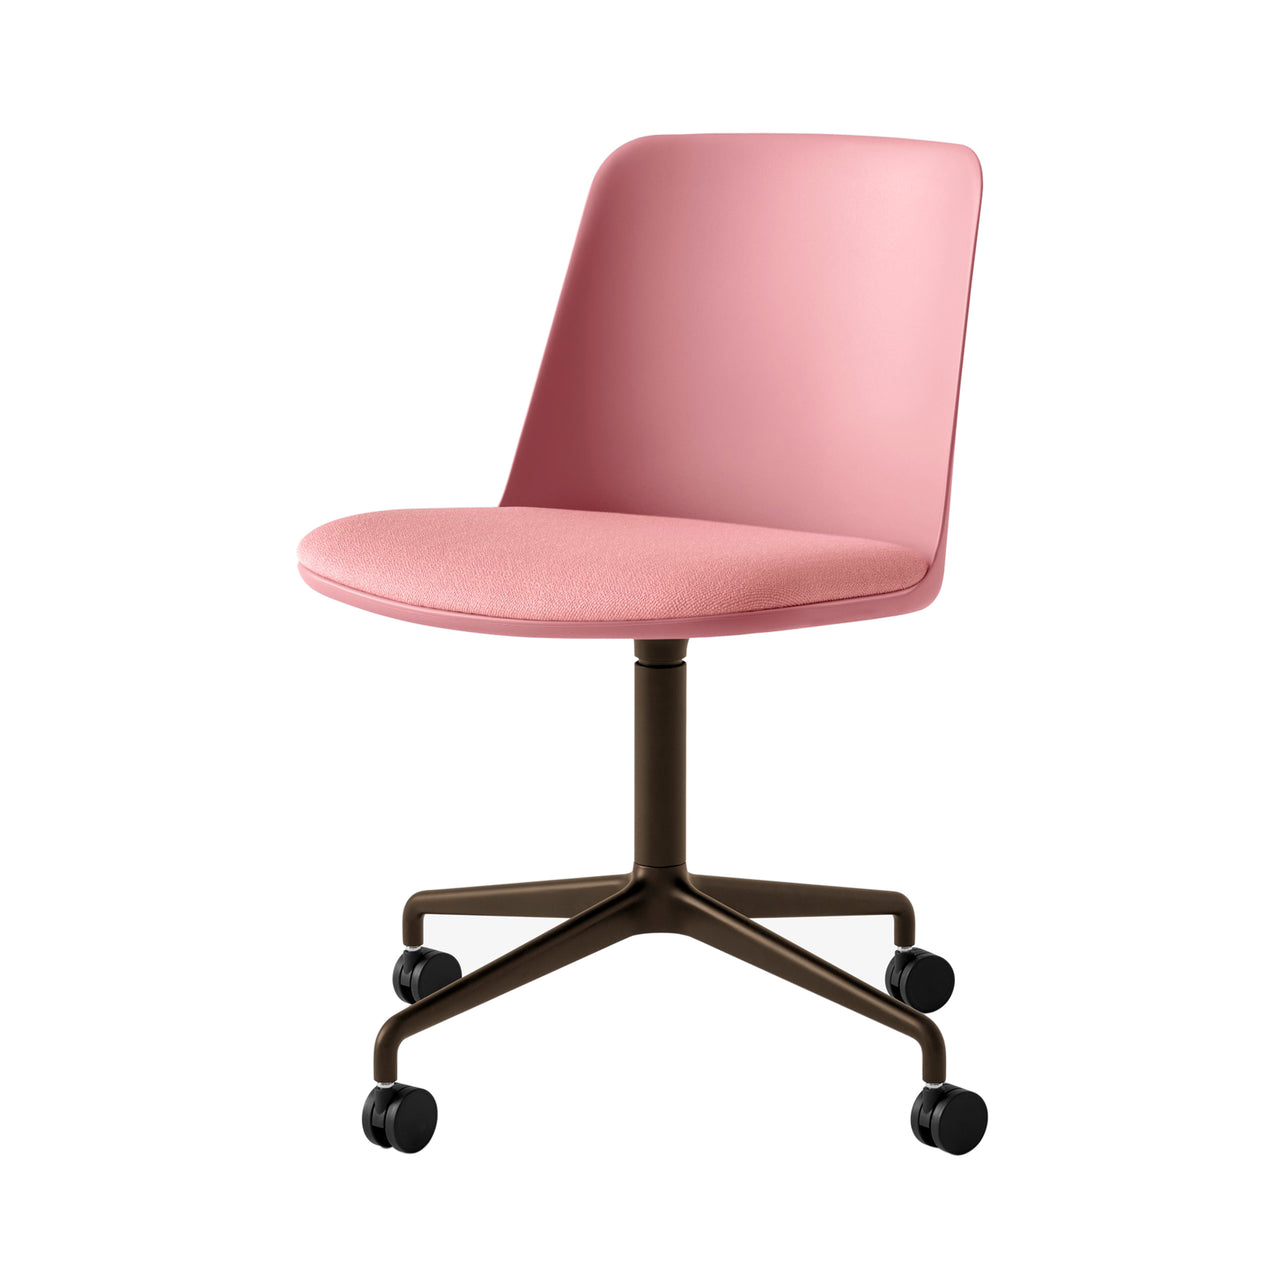 Rely Chair HW22: Soft Pink + Bronzed